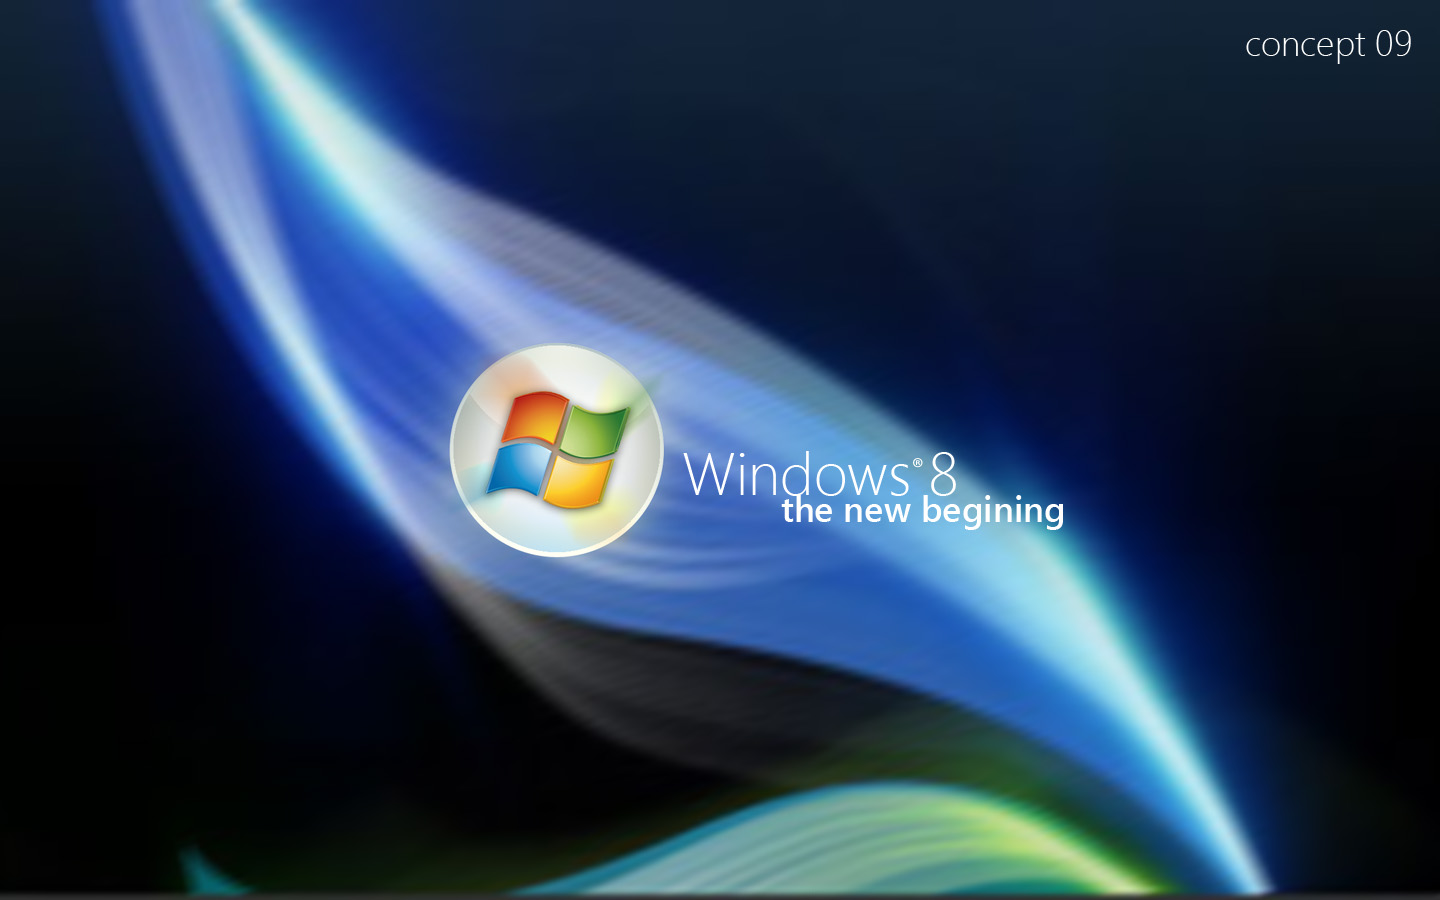 windows 8 the new beginning multi color wallpaper for free